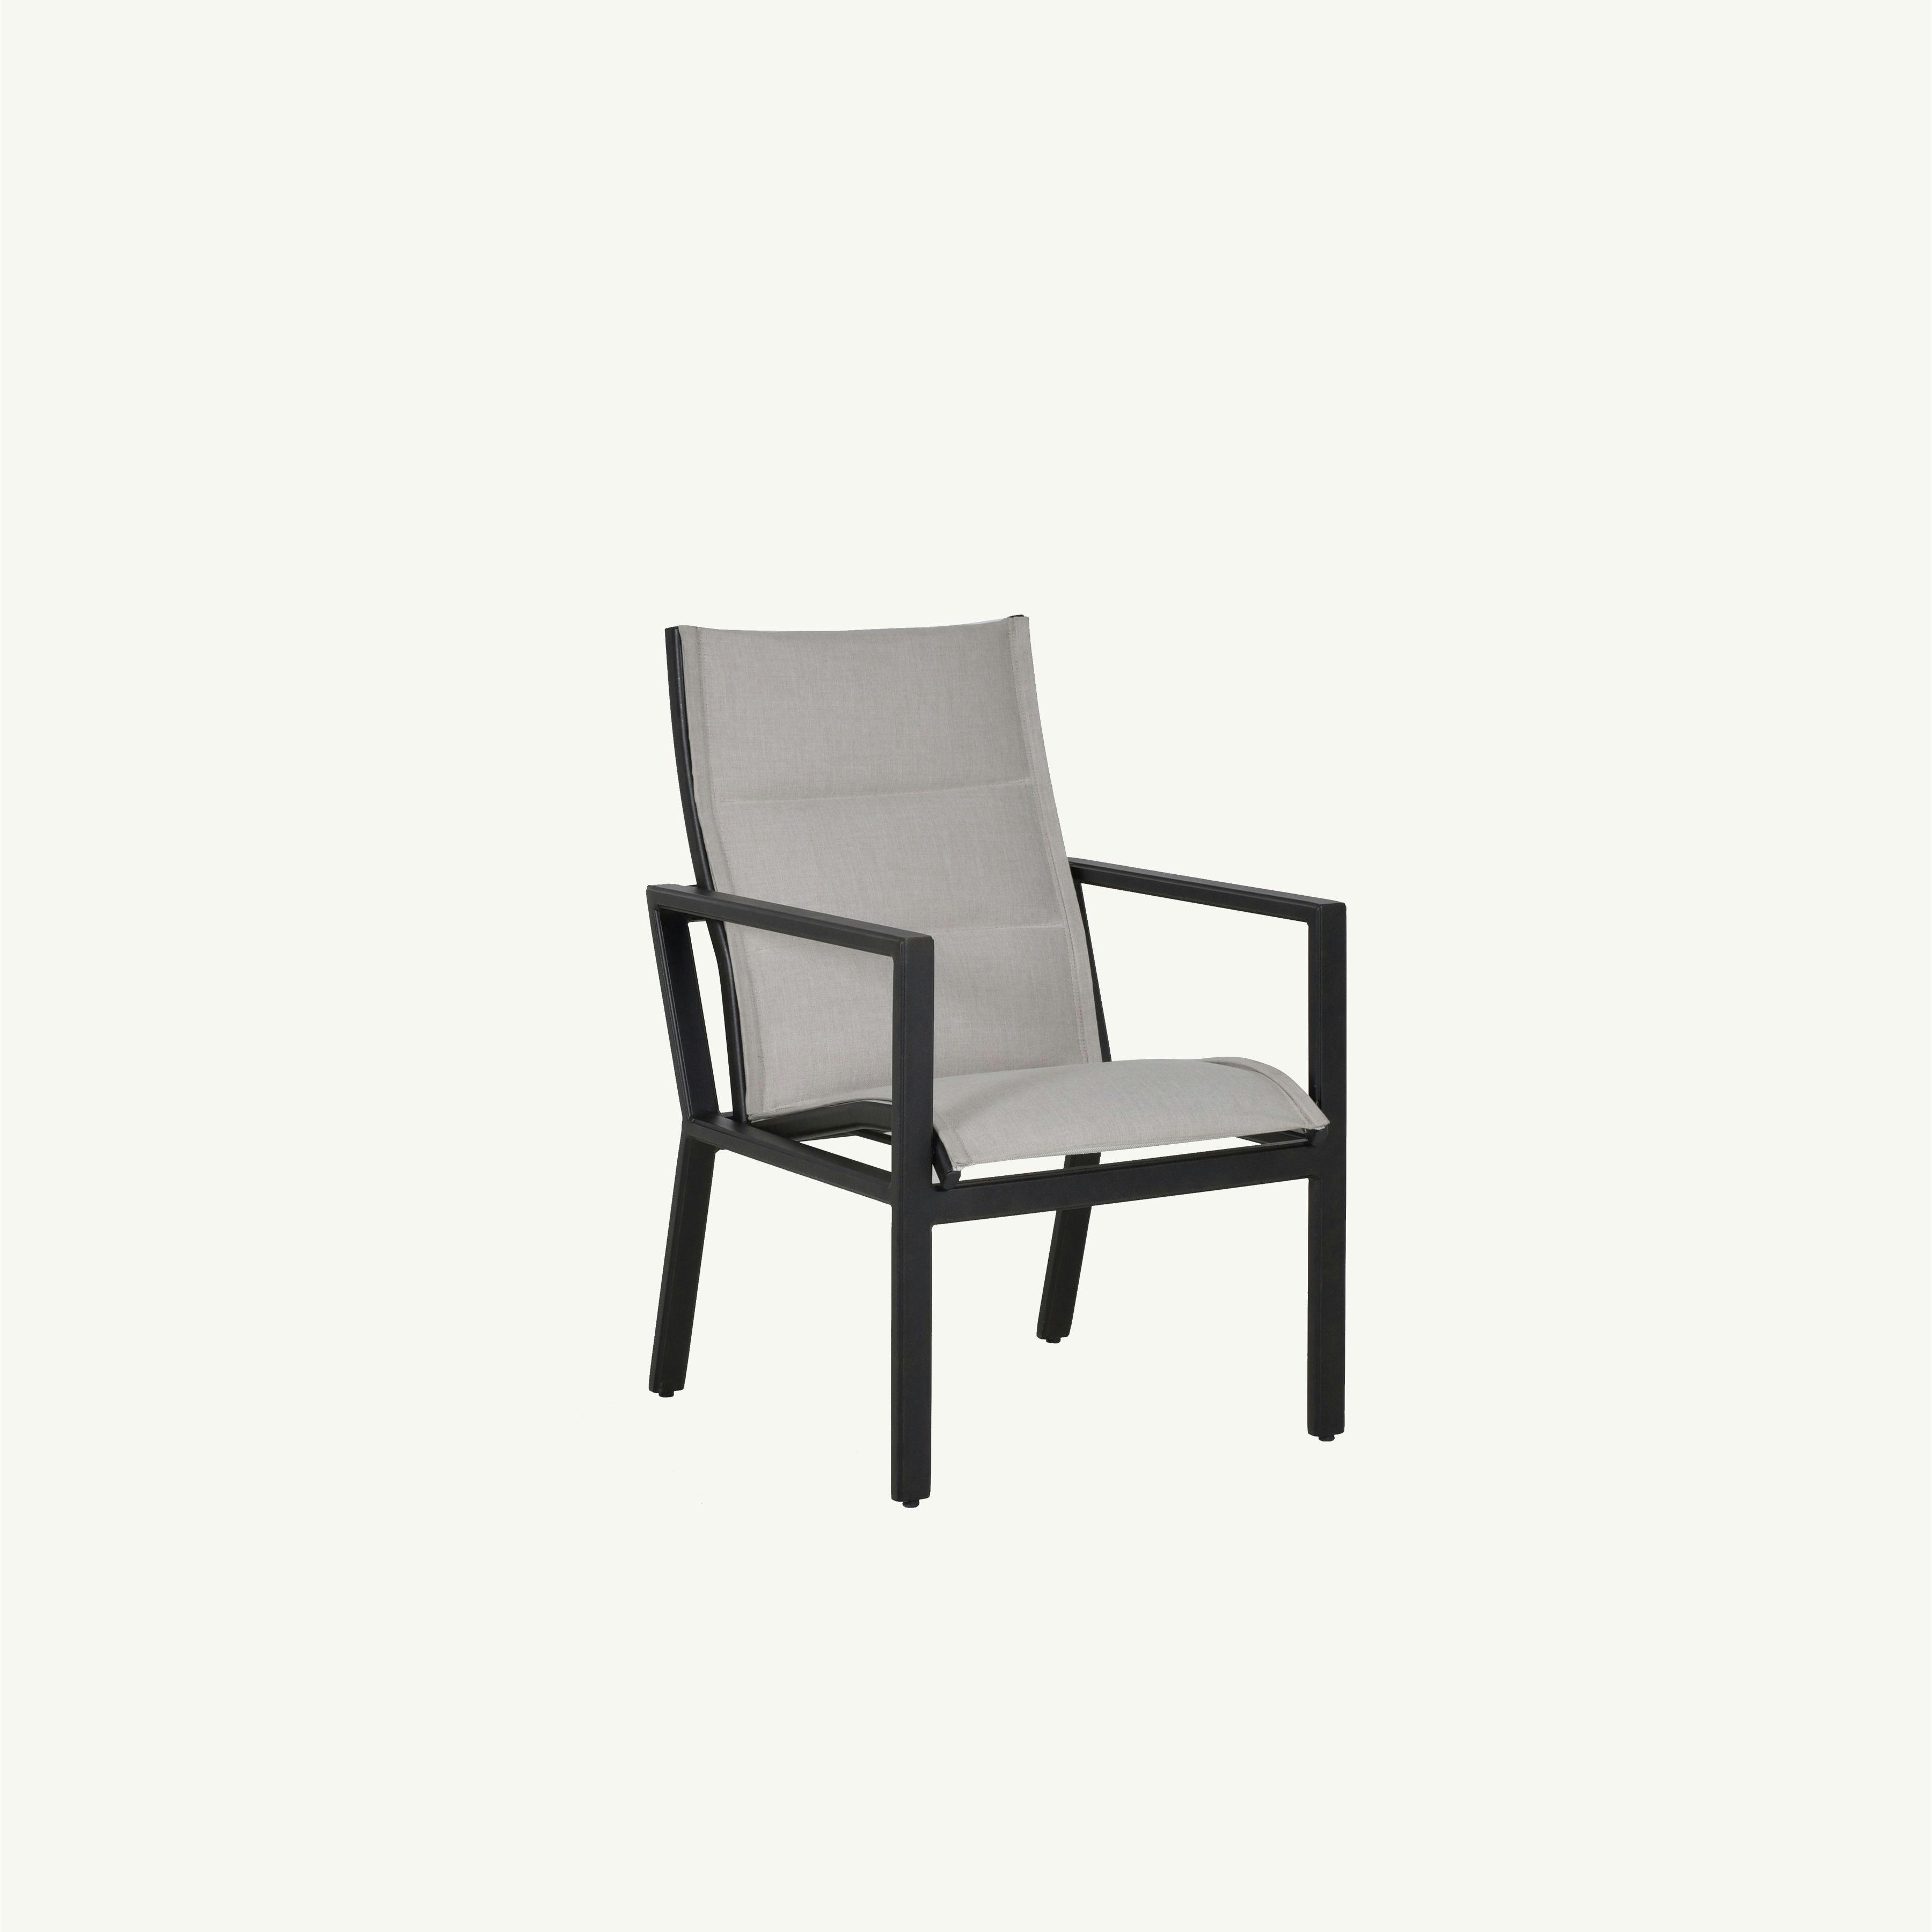 Saxton Padded Sling Dining Chair